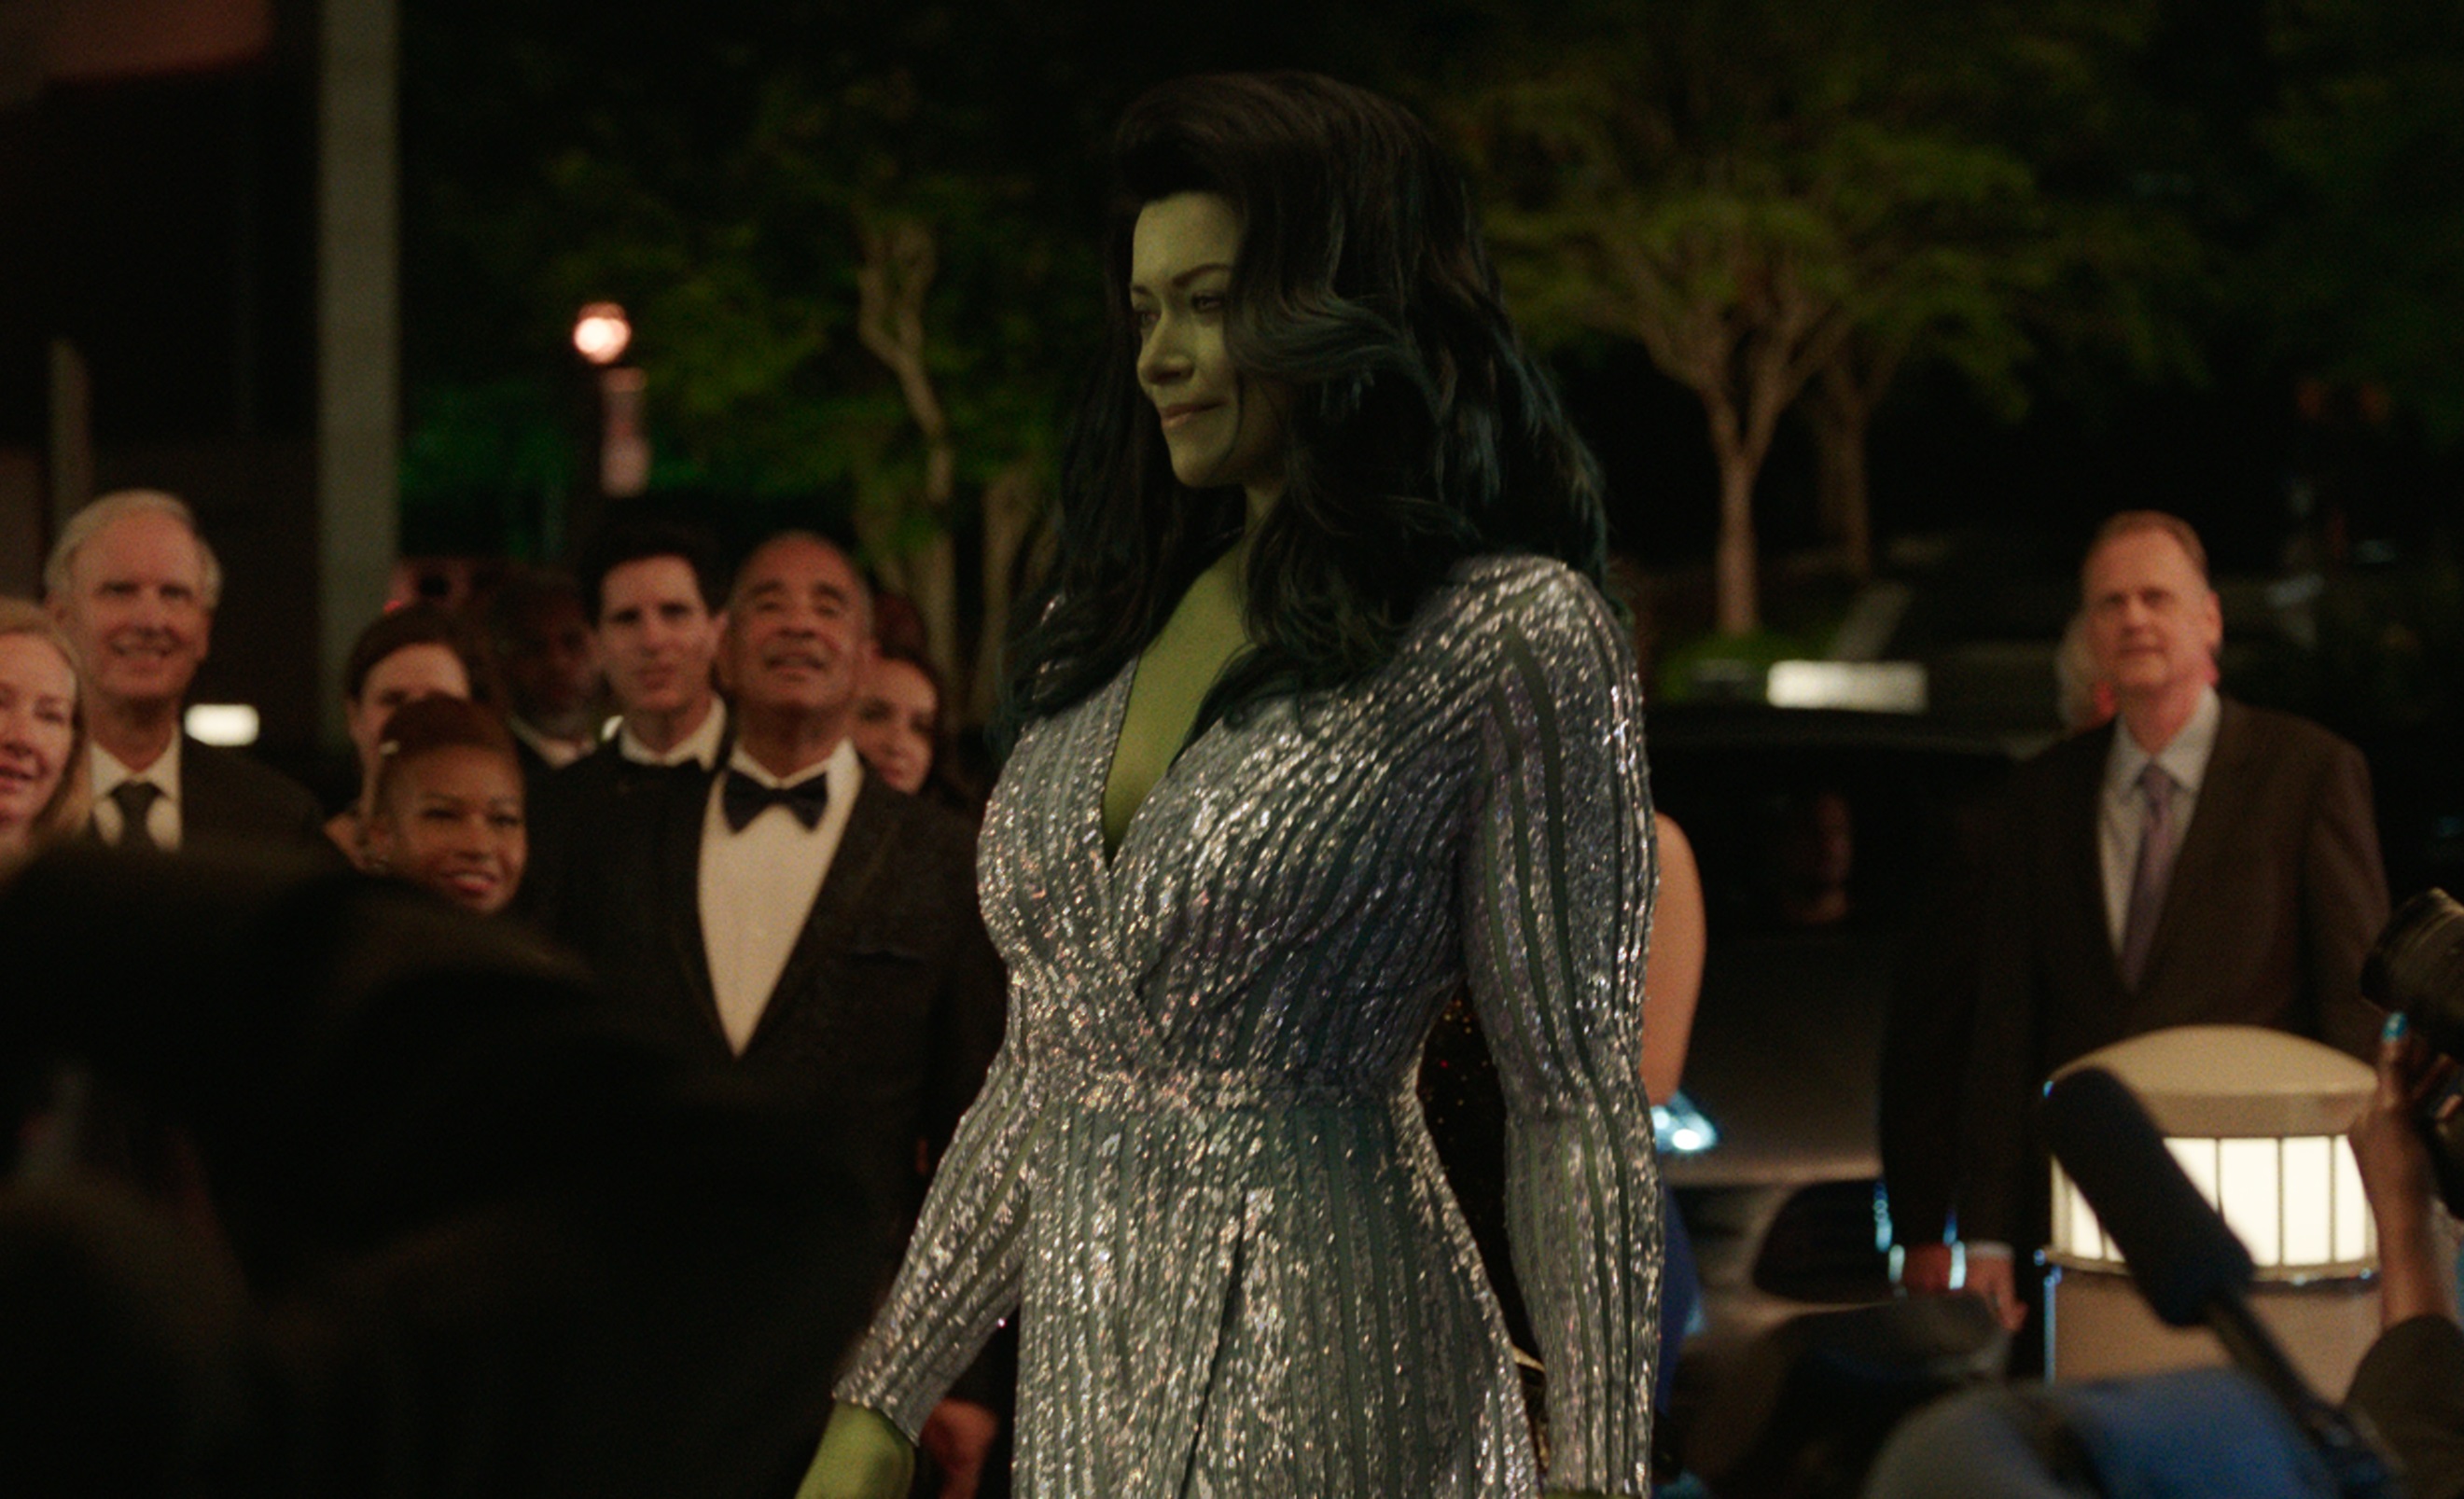 She-Hulk: Attorney at Law comes to Disney Plus in August.